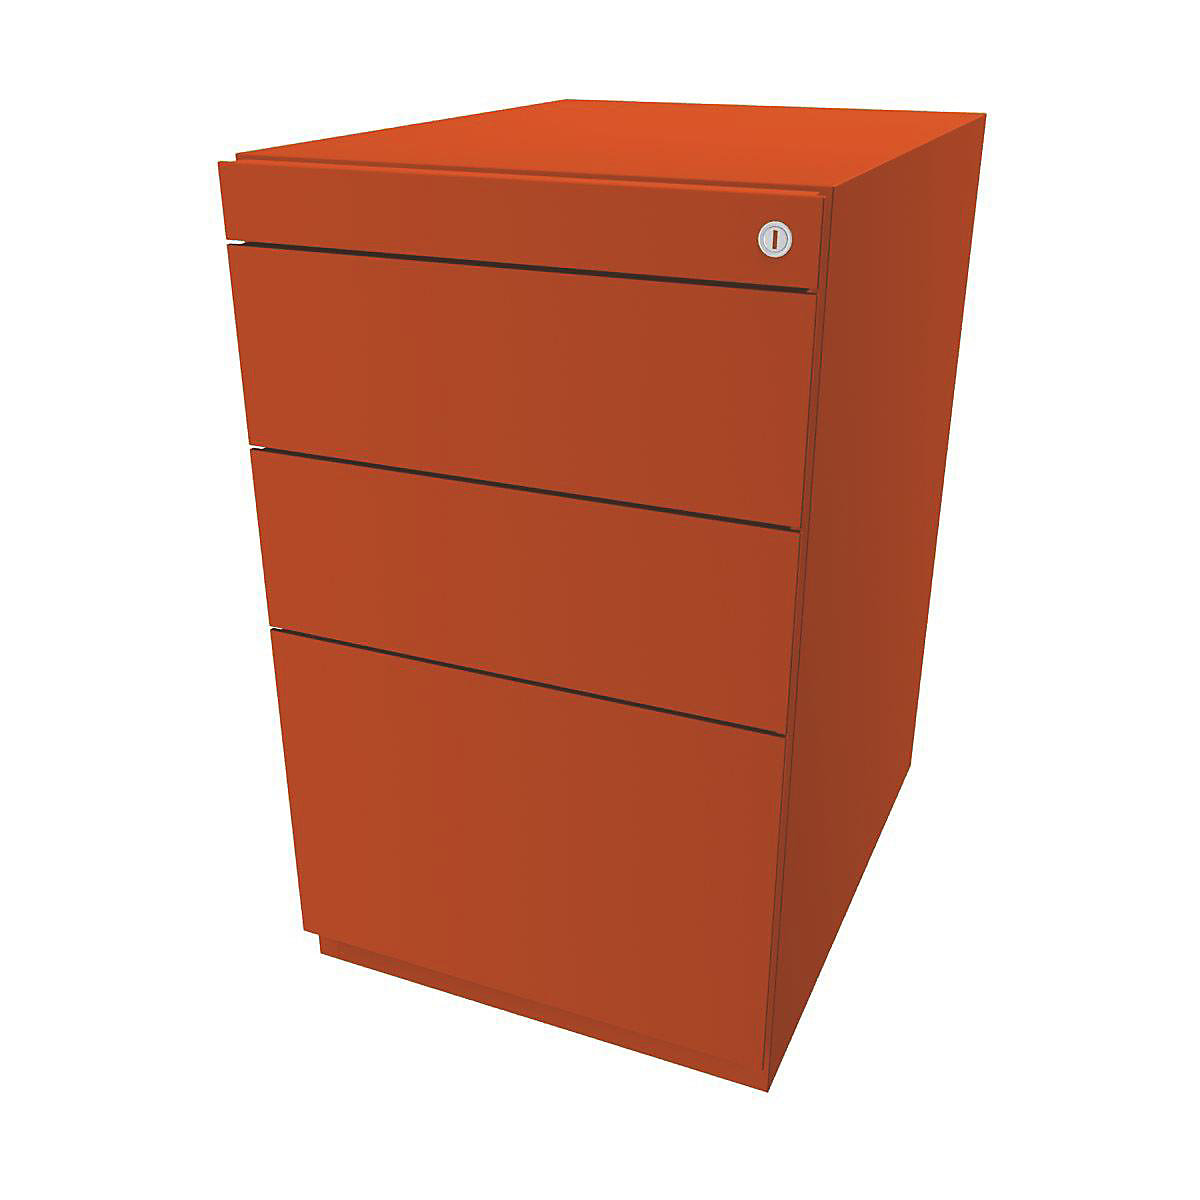 Note™ fixed pedestal, with 2 universal drawers, 1 suspension file drawer – BISLEY, without top, depth 565 mm, orange-5